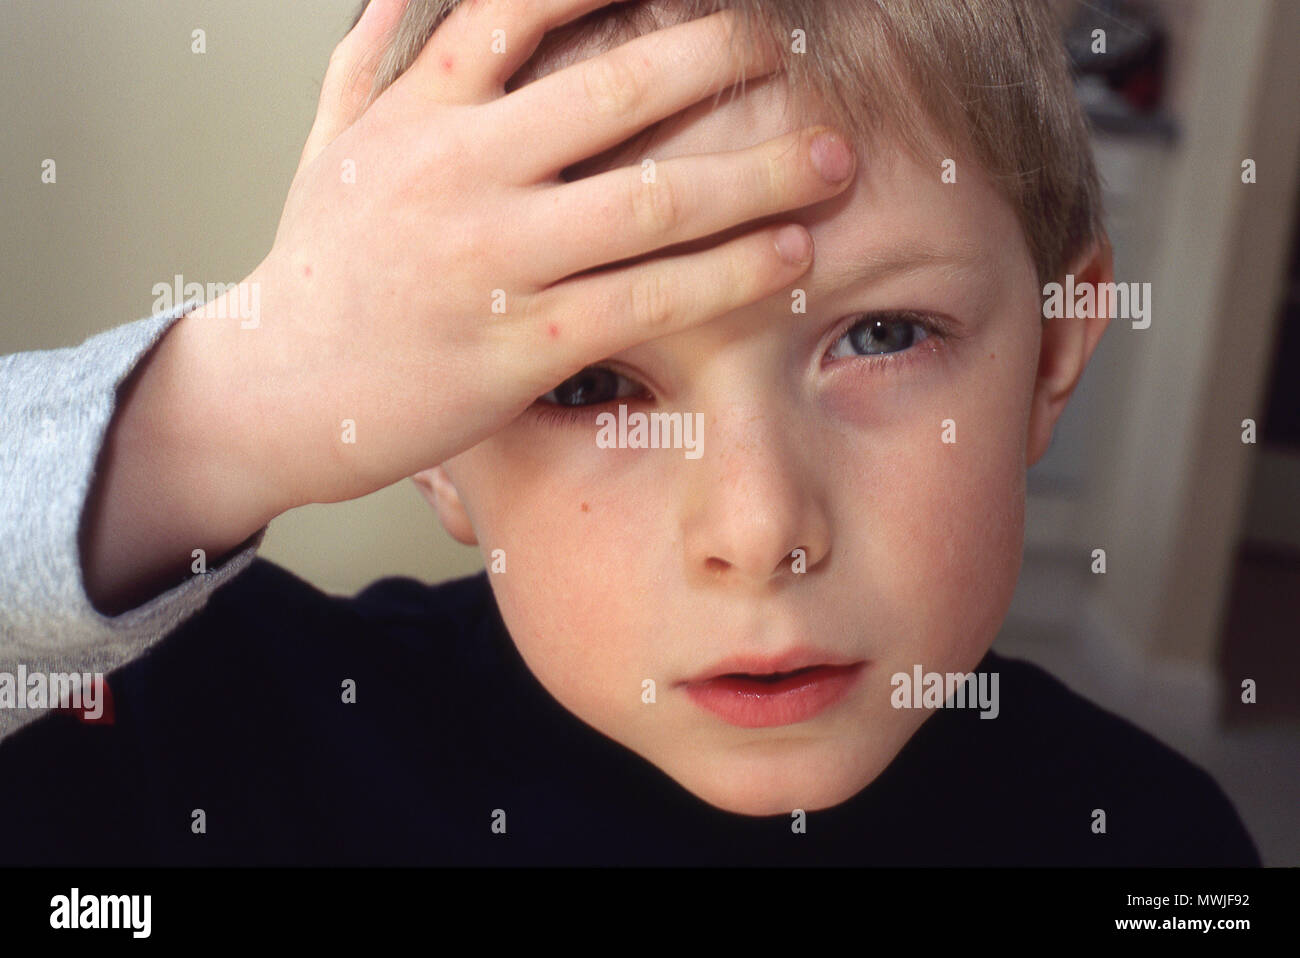 Six year old boy with a headache Stock Photo